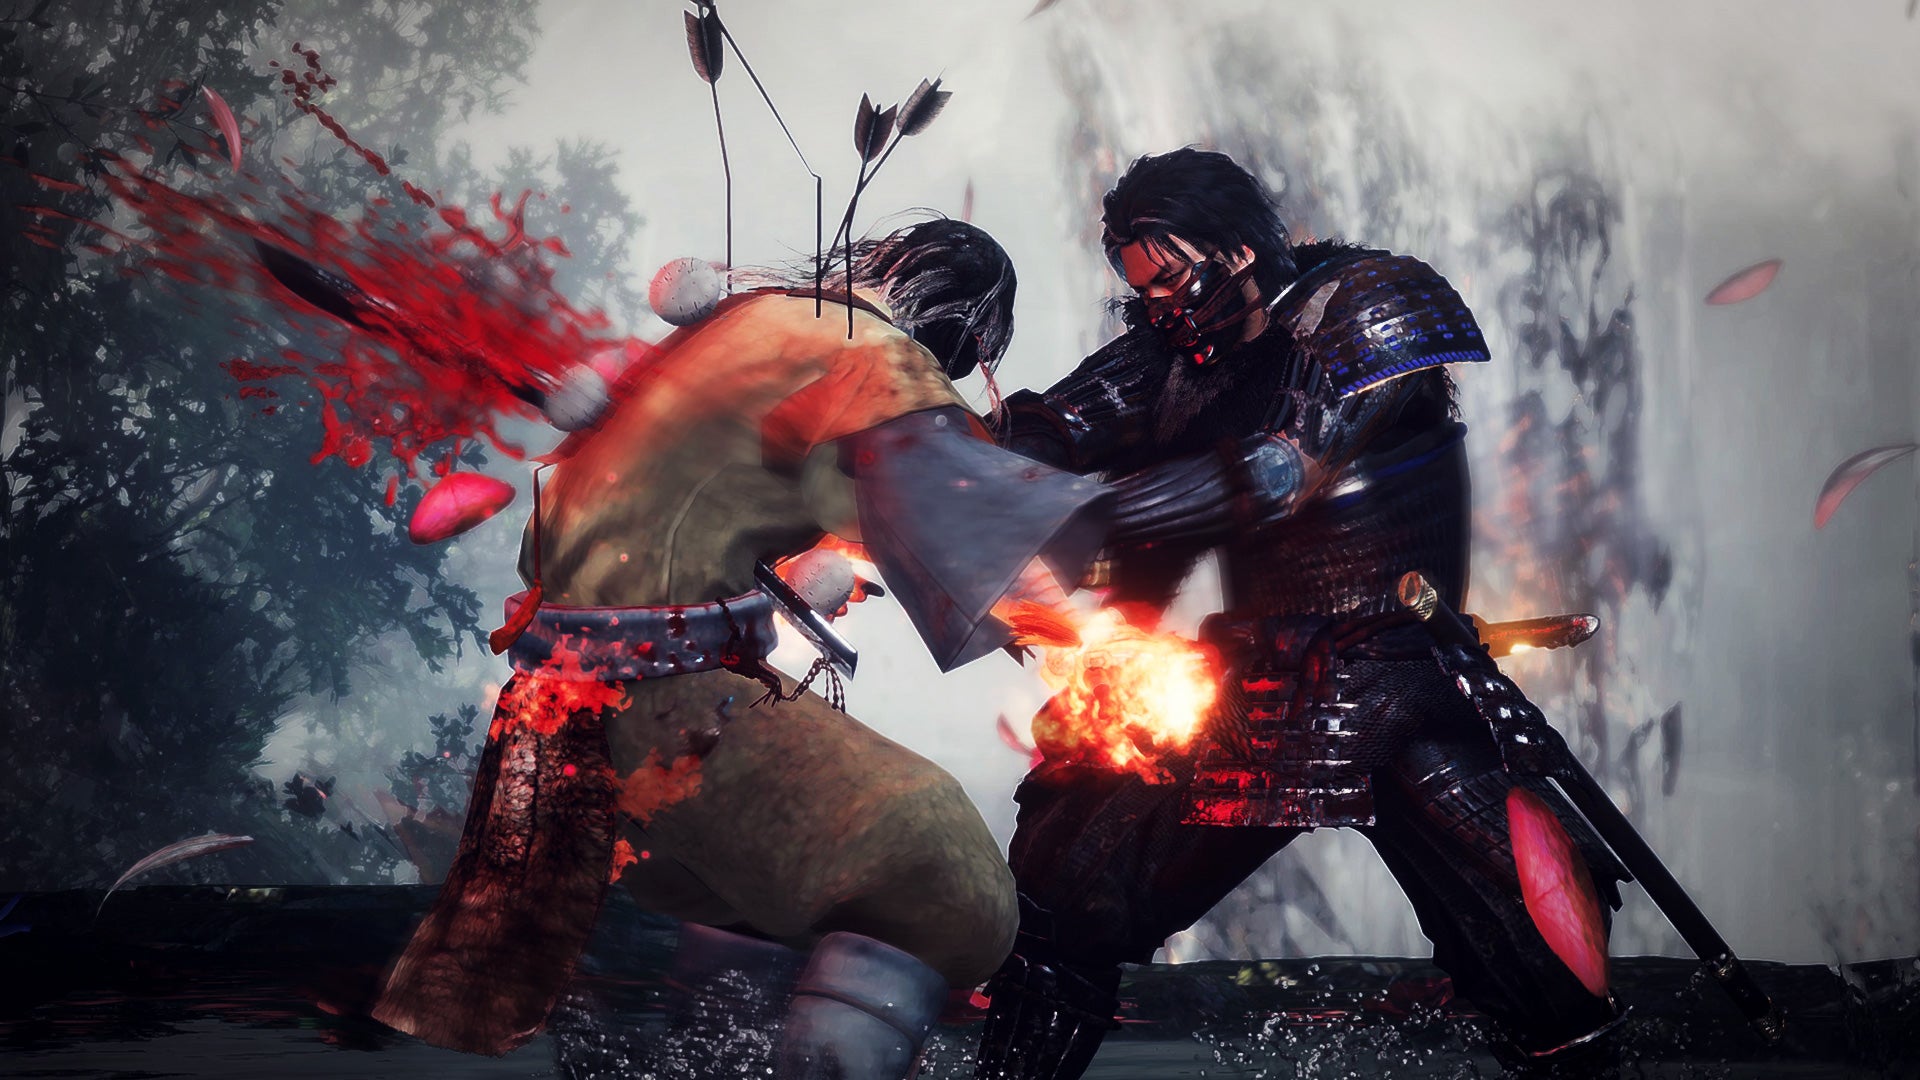 Image for Koei Tecmo Steam sale features discounts for Nioh 2 and Attack on Titan 2